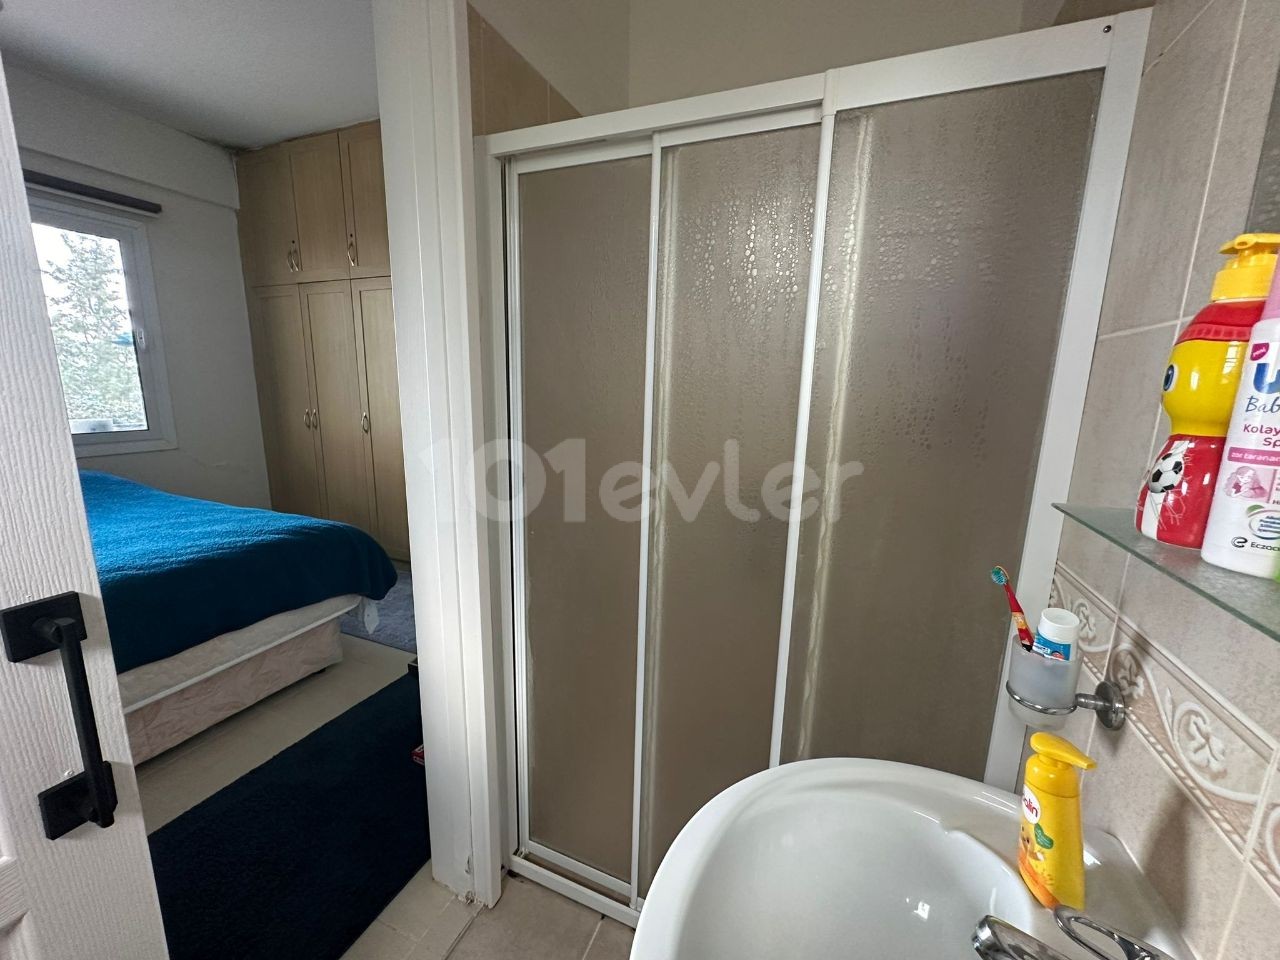 2+1 FLAT FOR RENT WITH SEA VIEW IN GİRNE ÇATALKÖY SEA VISTA SITE